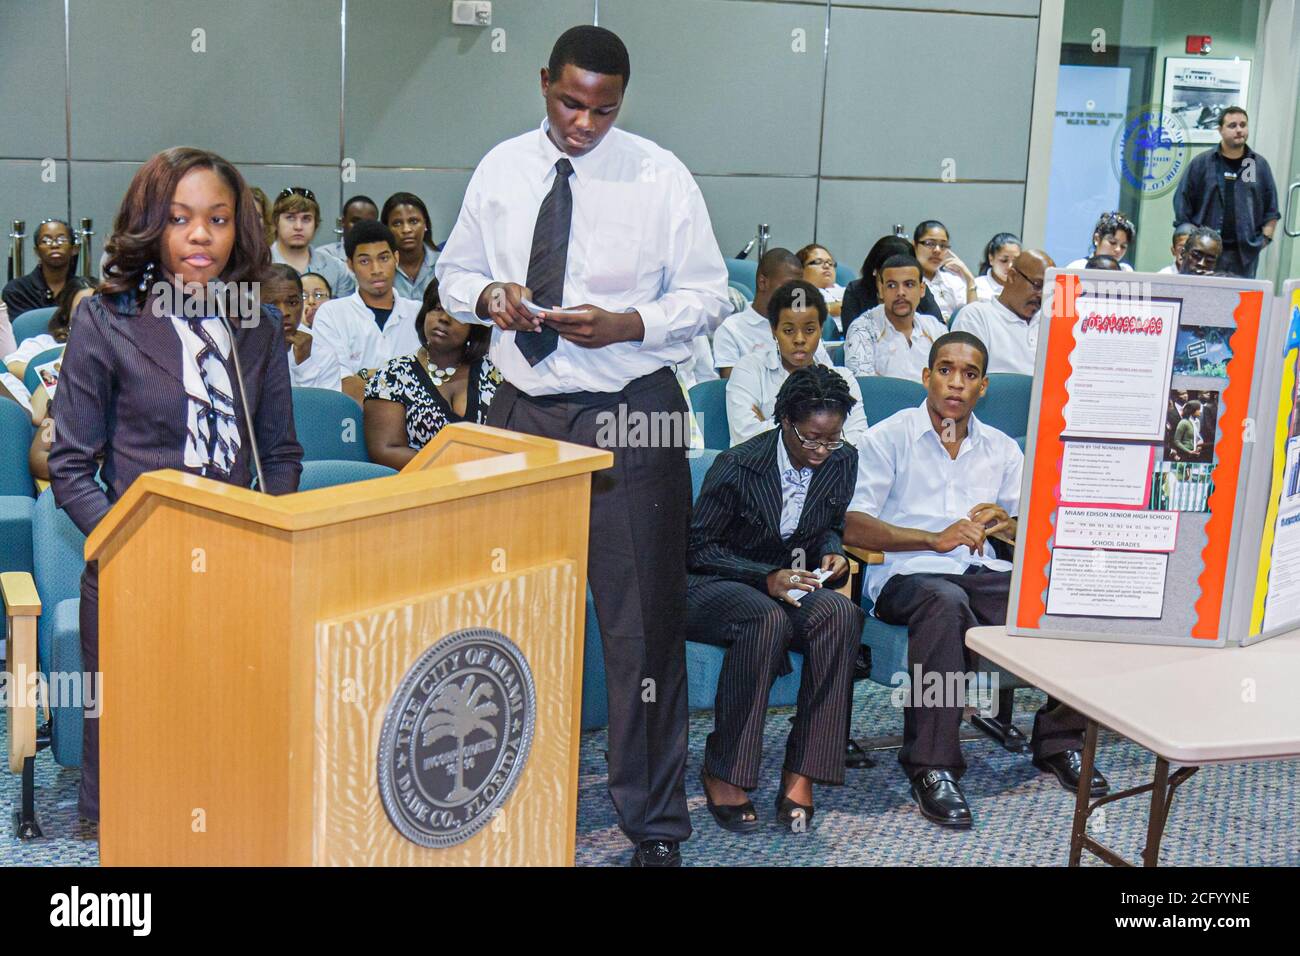 Miami Florida,Coconut Grove Miami City Hall building,Commission Chambers High School Youth Council Presentation,student students speaker speaks public Stock Photo